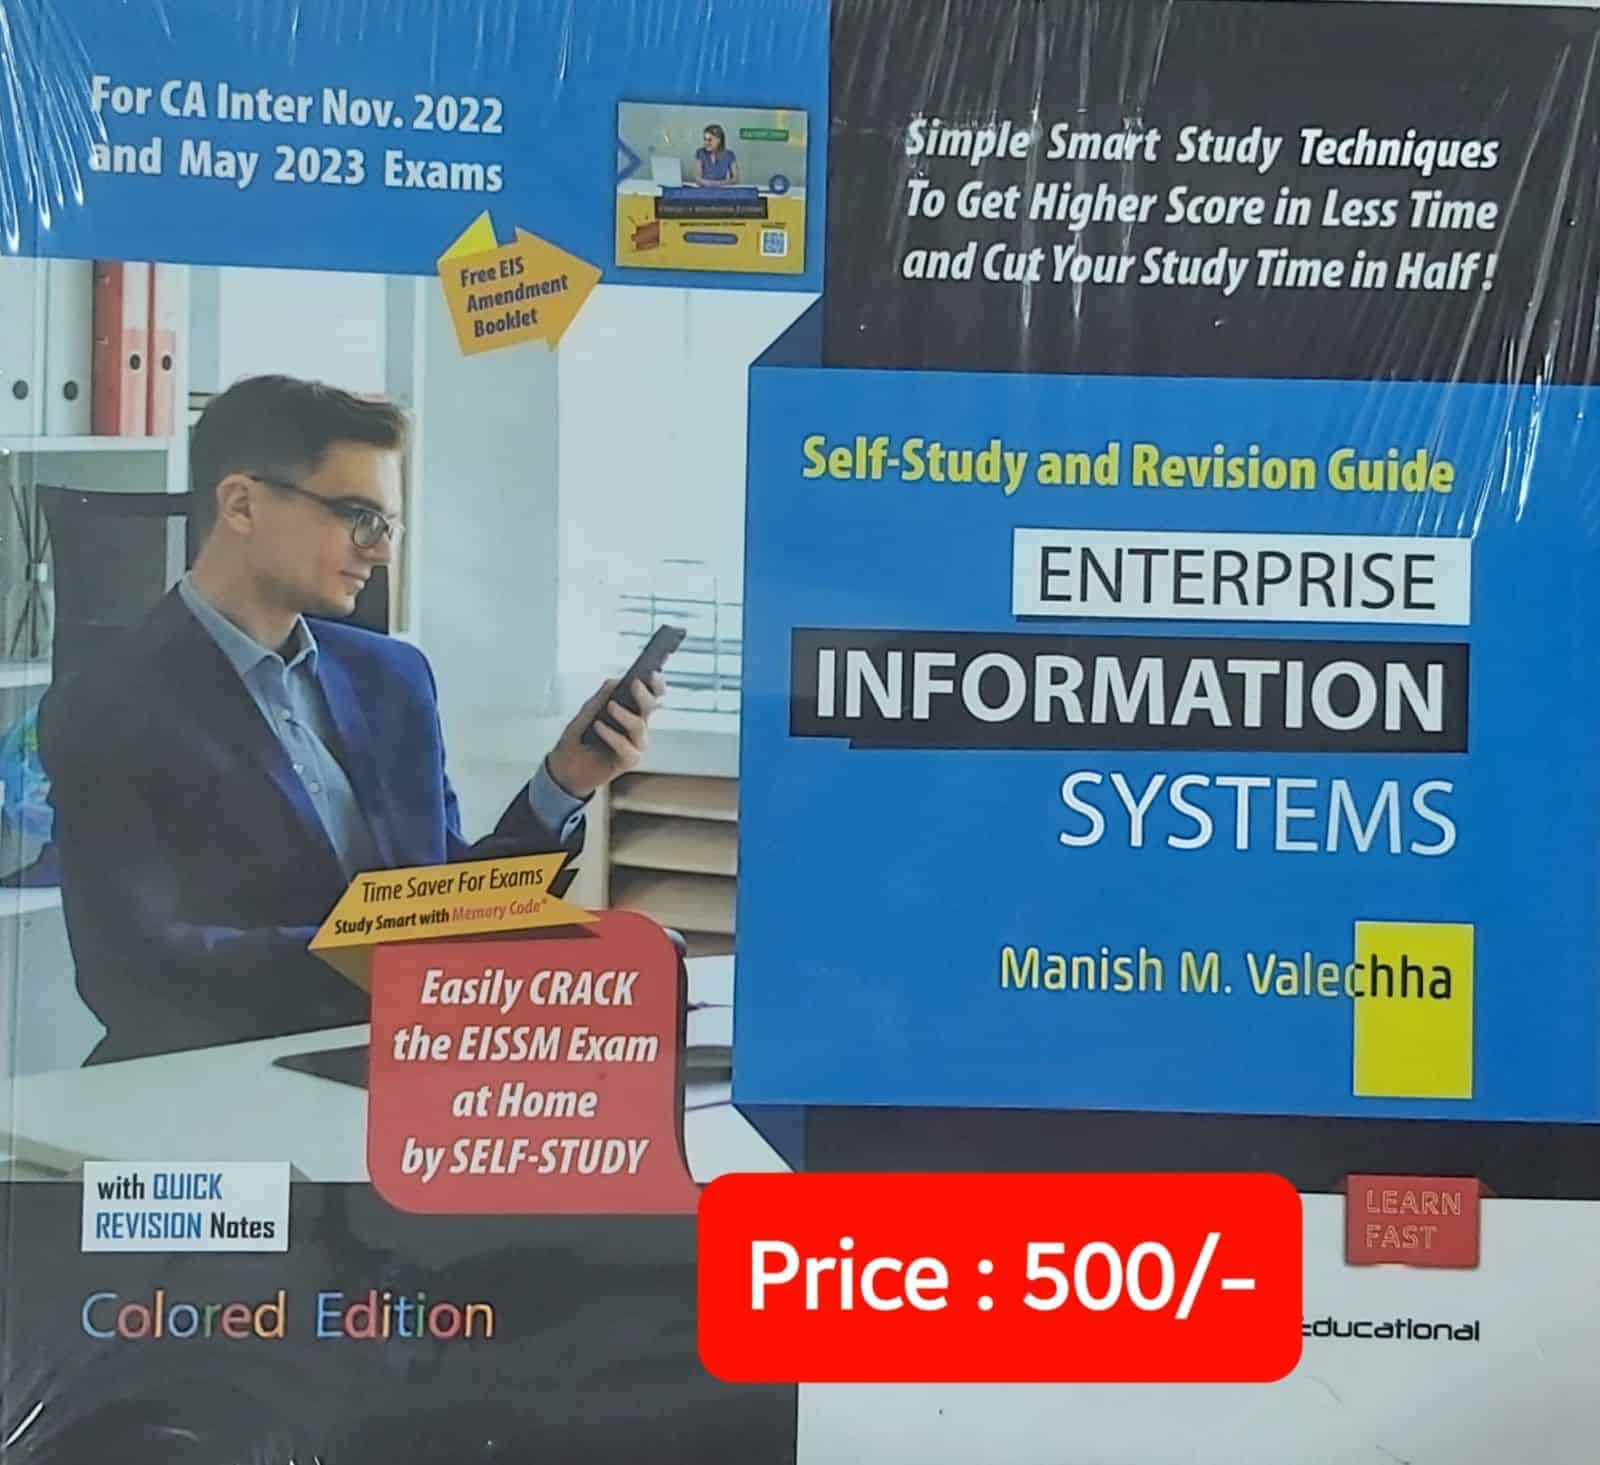 Valechha Educational Study and revision guide on Enterprise Information Systems for CA Intermediate by Manish M. Valechha for 2022 Exam